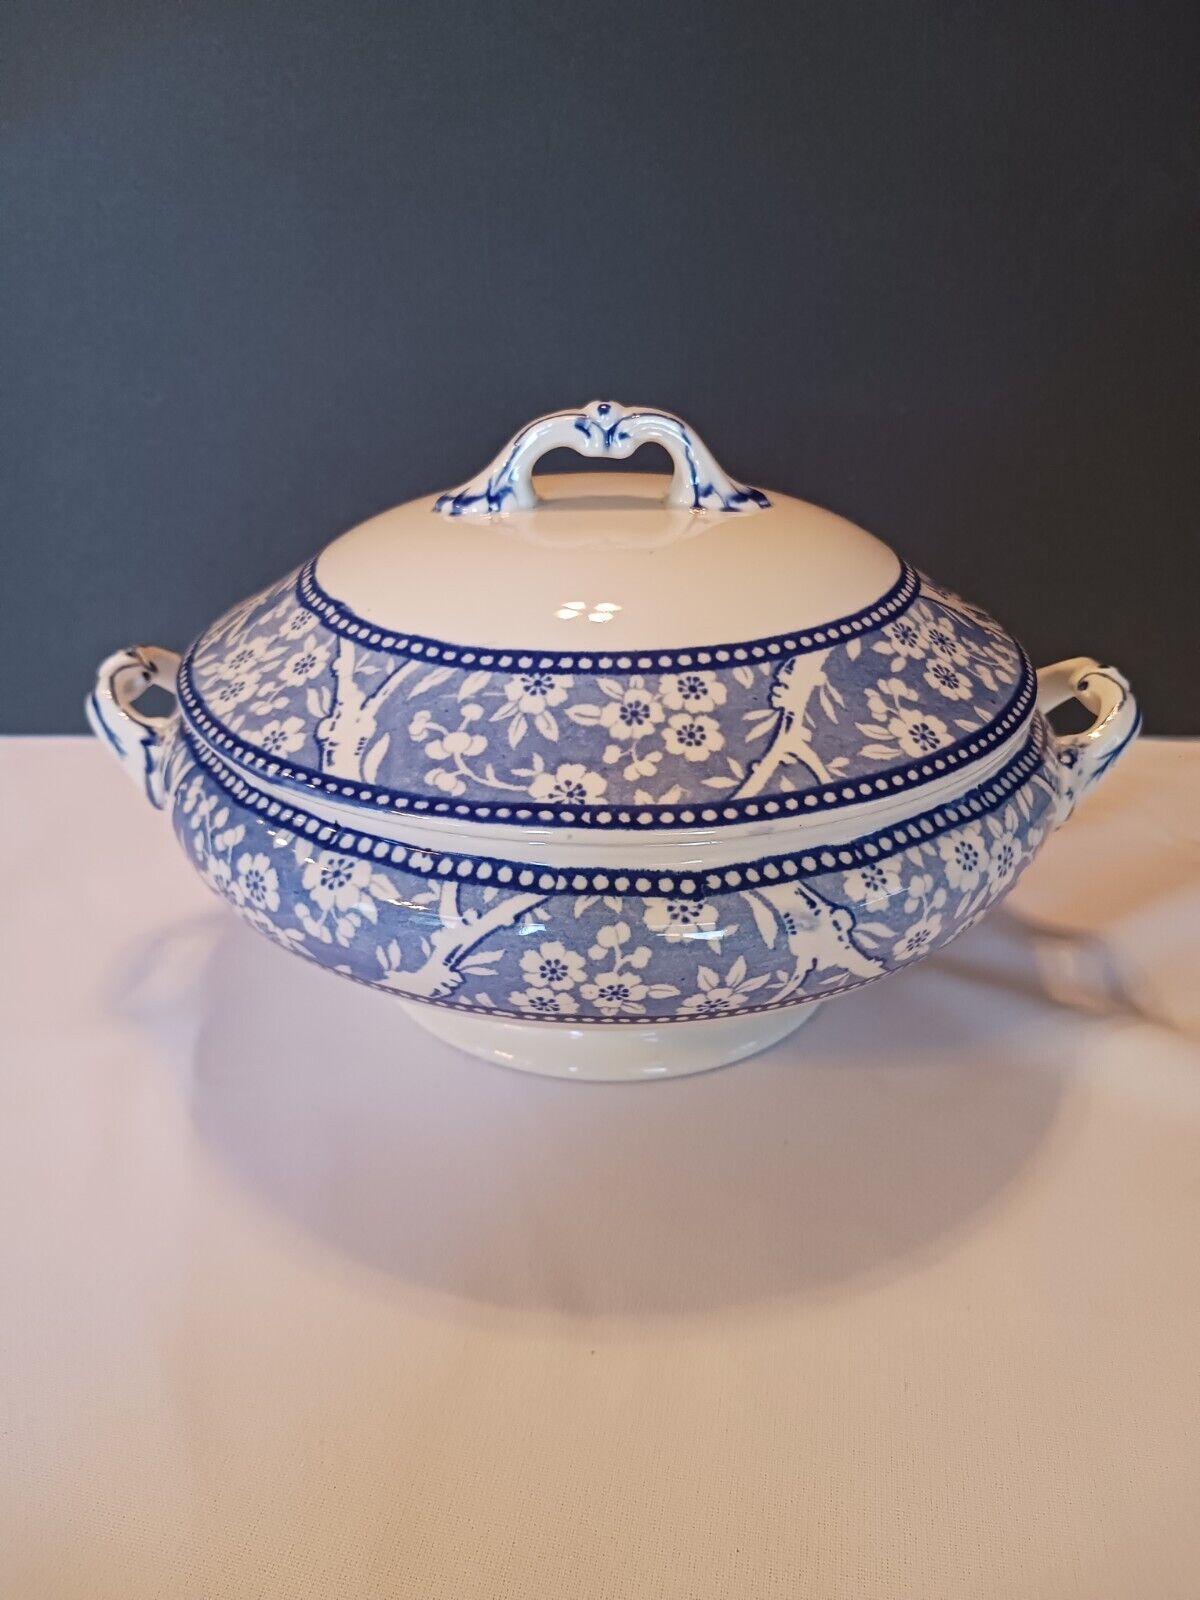 Vintage Wedgwood Home Festivity soup tureen - Made in England 